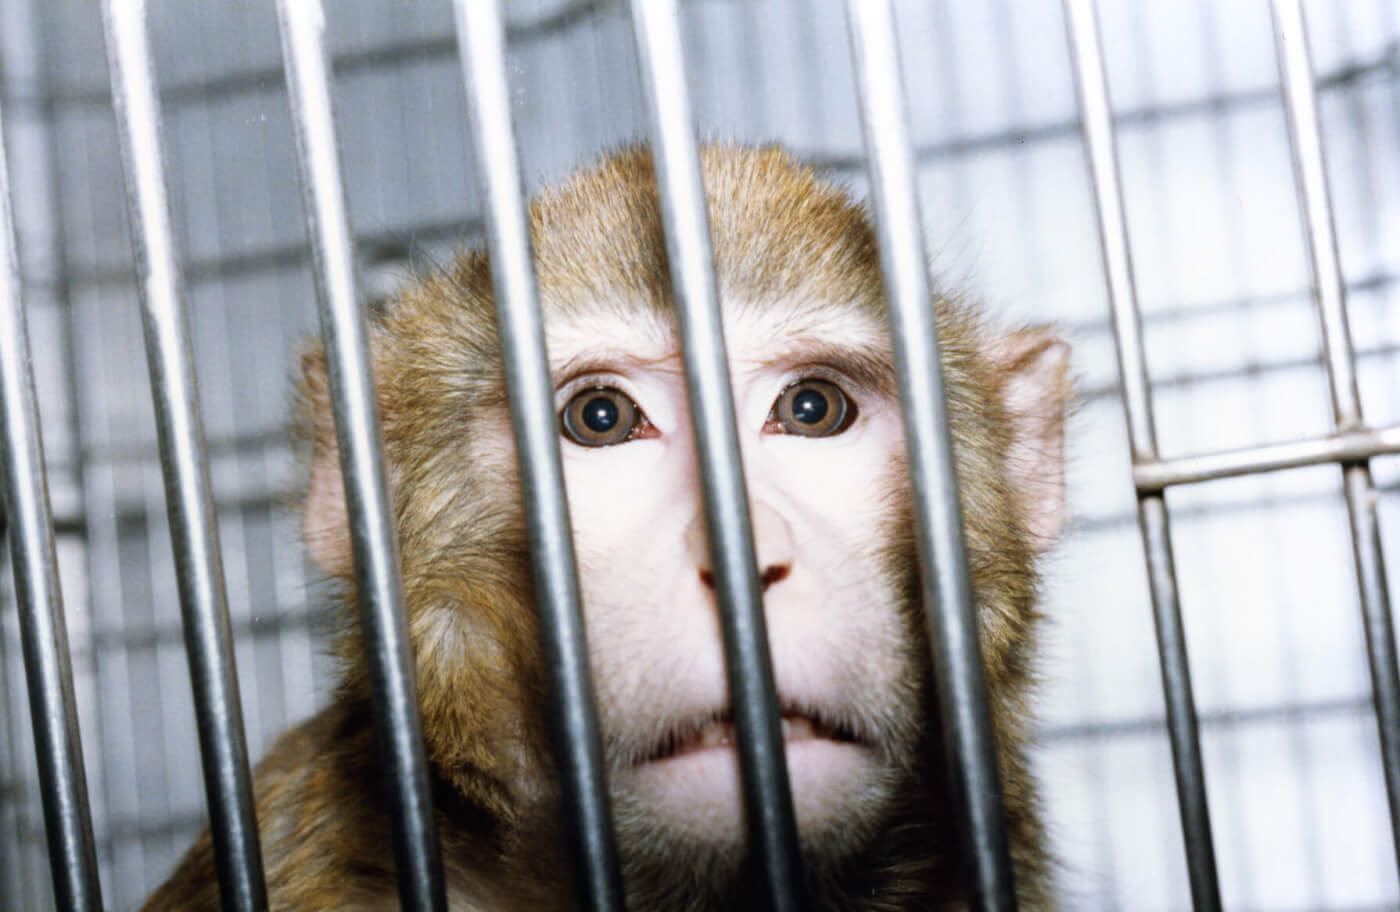 Are There Any Benefits to Animal Testing? Get the Facts | PETA